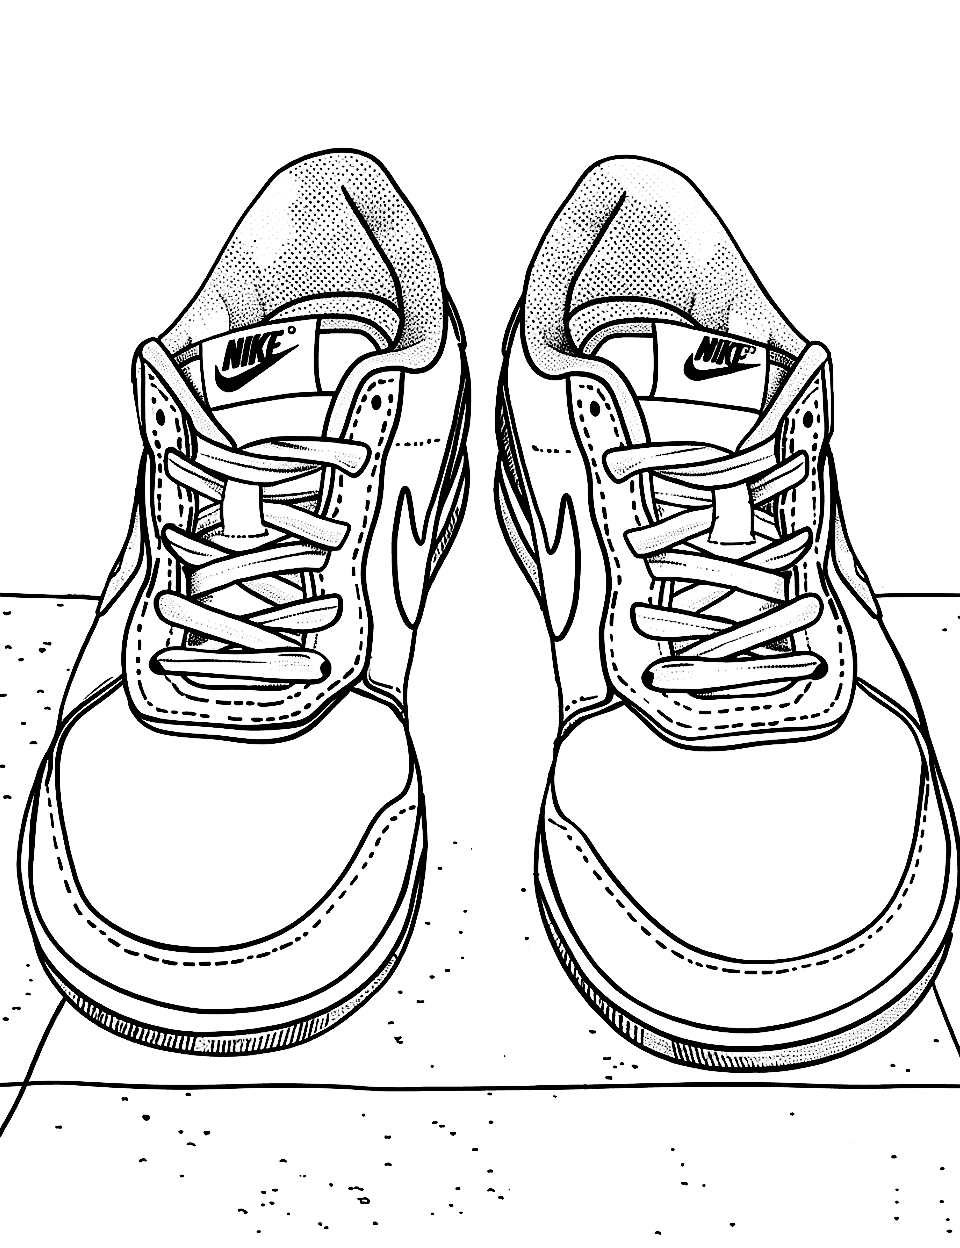 Tennis Shoes Ready to Run Shoe Coloring Page - A pair of tennis shoes at the starting line of a track.